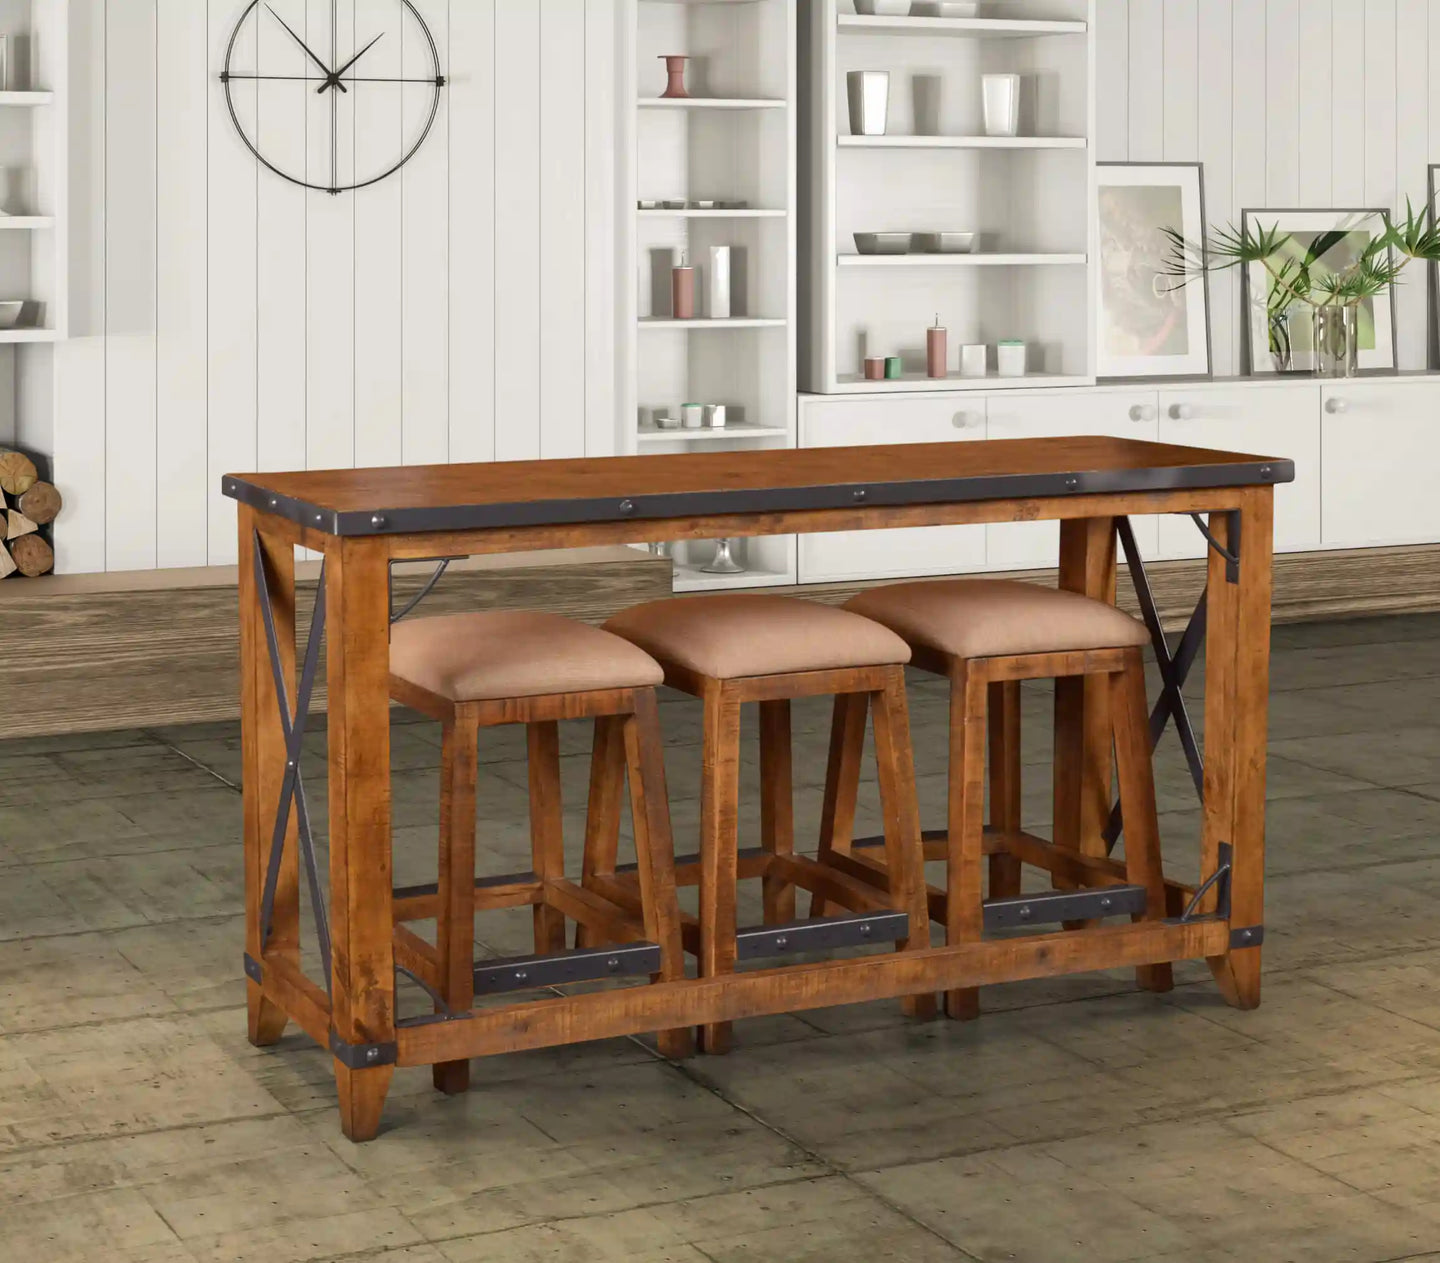 Sunset Trading Rustic City 4 Piece Counter Dining Set | Console with Stools